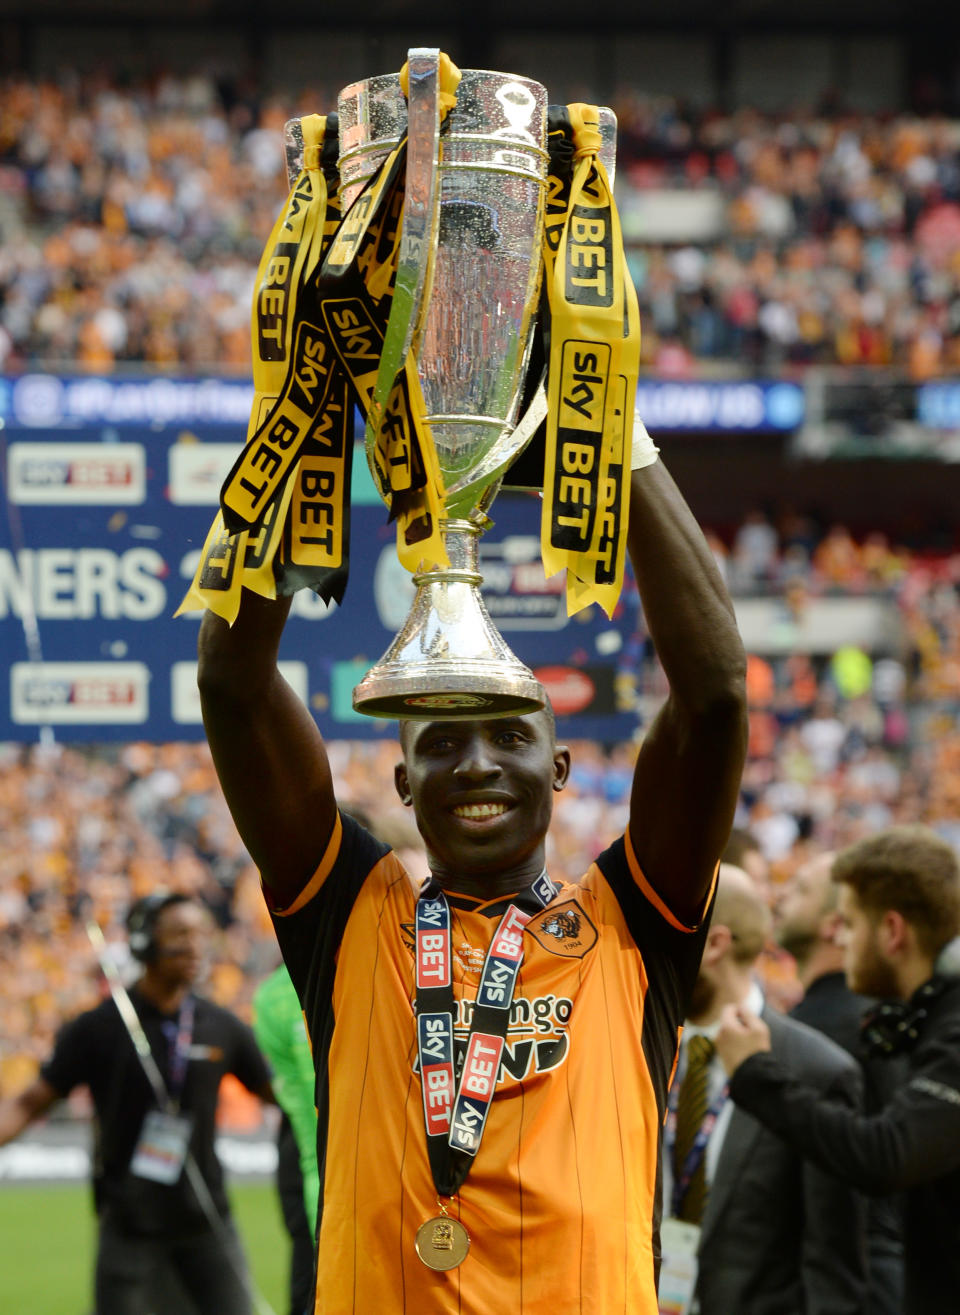 Britain Soccer Football - Hull City v Sheffield Wednesday - Sky Bet Football League Championship Play-Off Final - Wembley Stadium - 28/5/16 Hull City's Mohamed Diame celebrates with the trophy after winning promotion back to the Premier League Action Images via Reuters / Tony O'Brien Livepic EDITORIAL USE ONLY. No use with unauthorized audio, video, data, fixture lists, club/league logos or "live" services. Online in-match use limited to 45 images, no video emulation. No use in betting, games or single club/league/player publications. Please contact your account representative for further details.